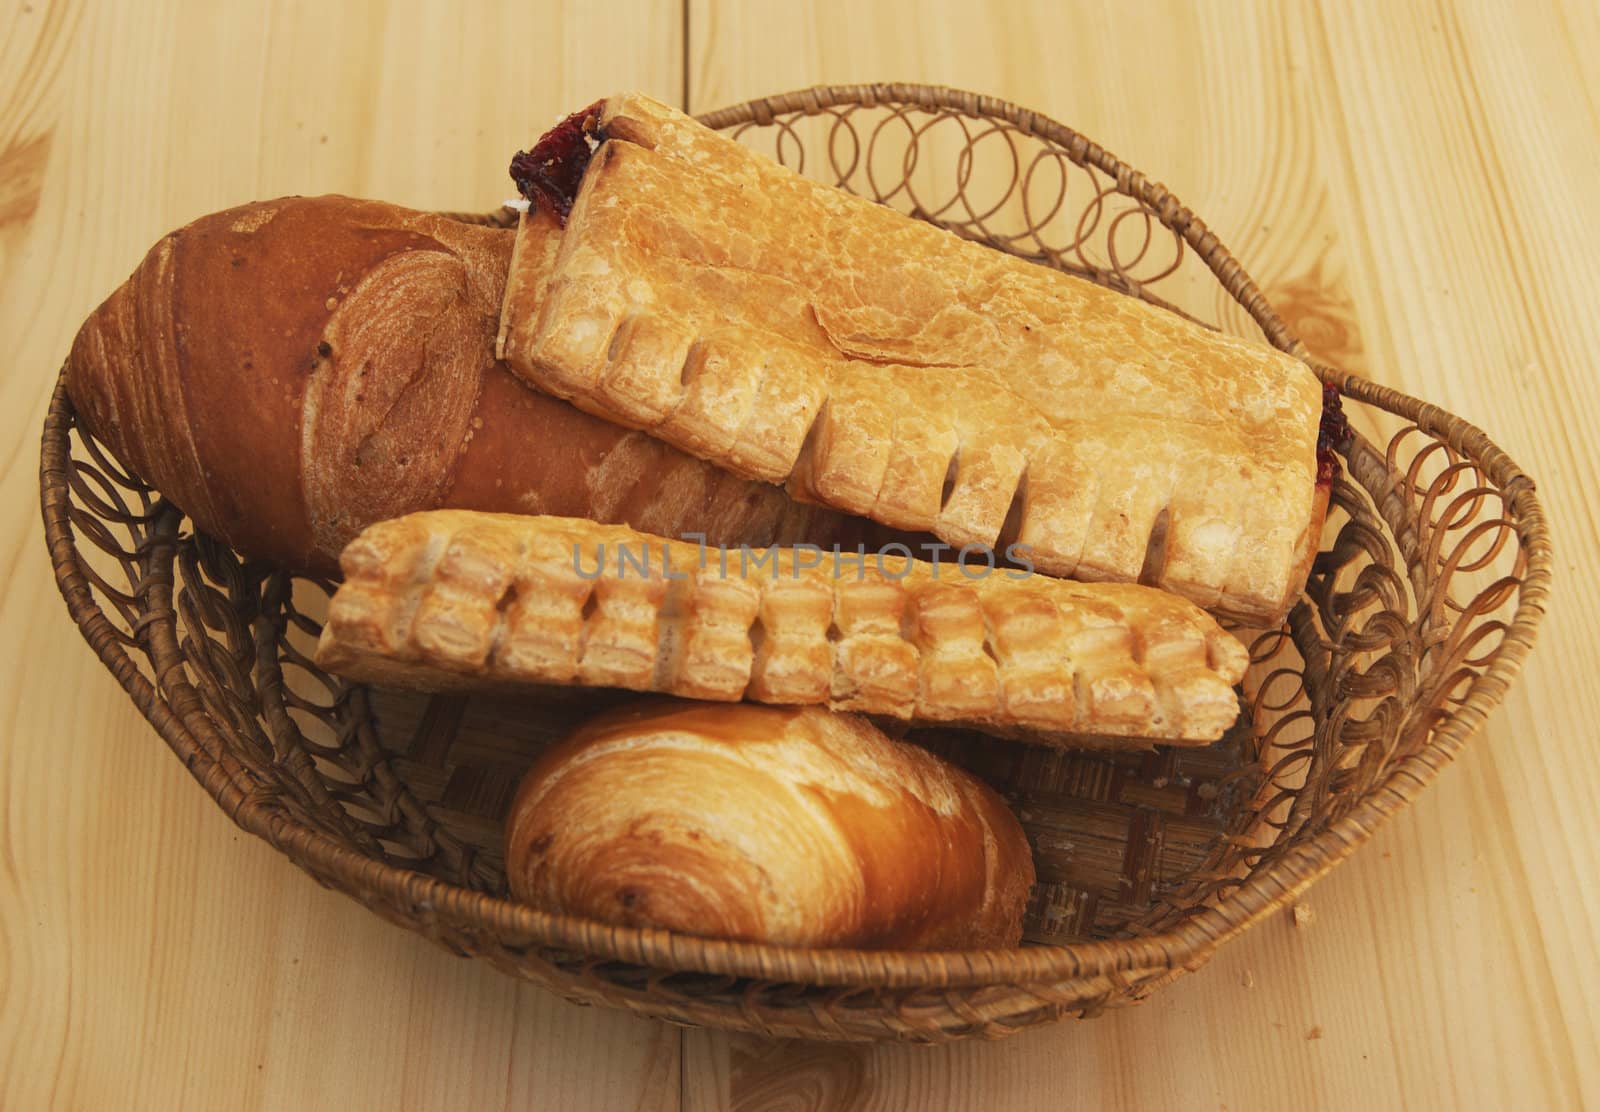 Bread and sweet pies in basket by cobol1964